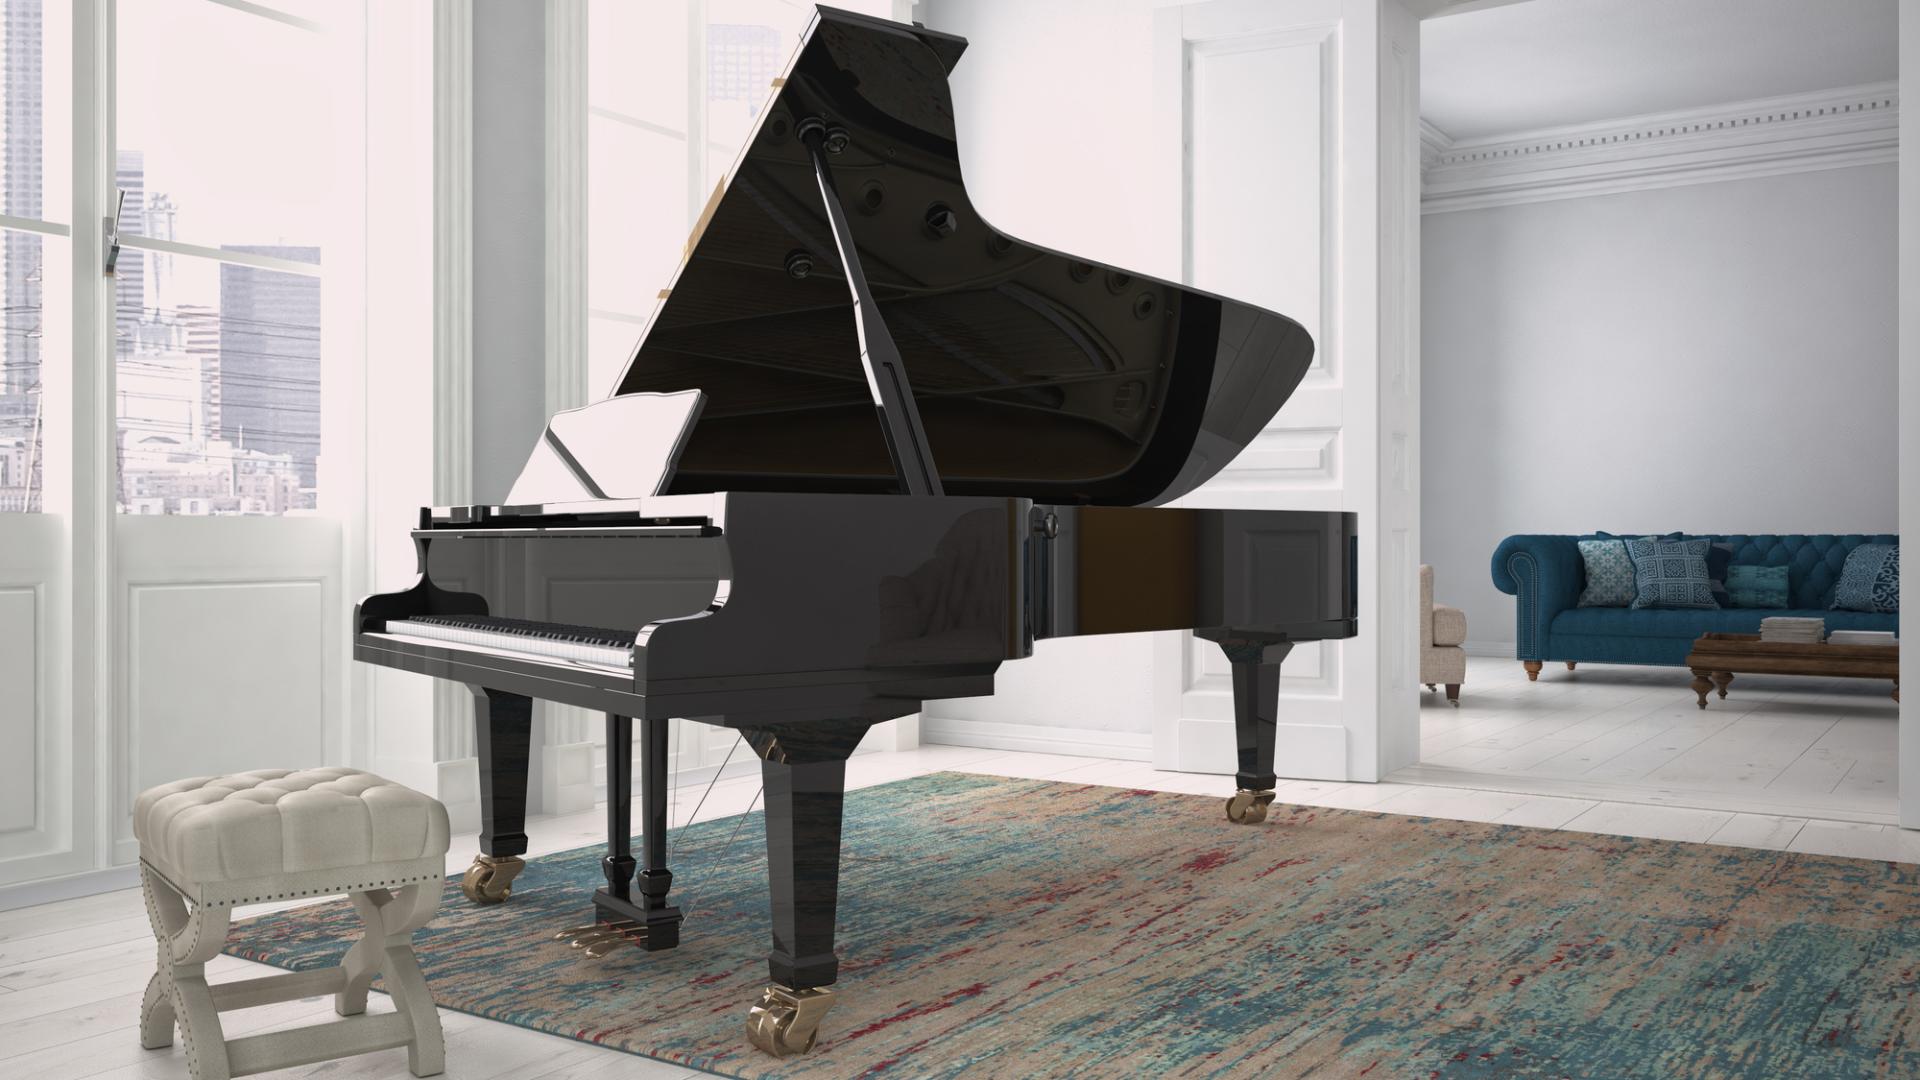 Piano Practice Rooms for Hire in Sydney